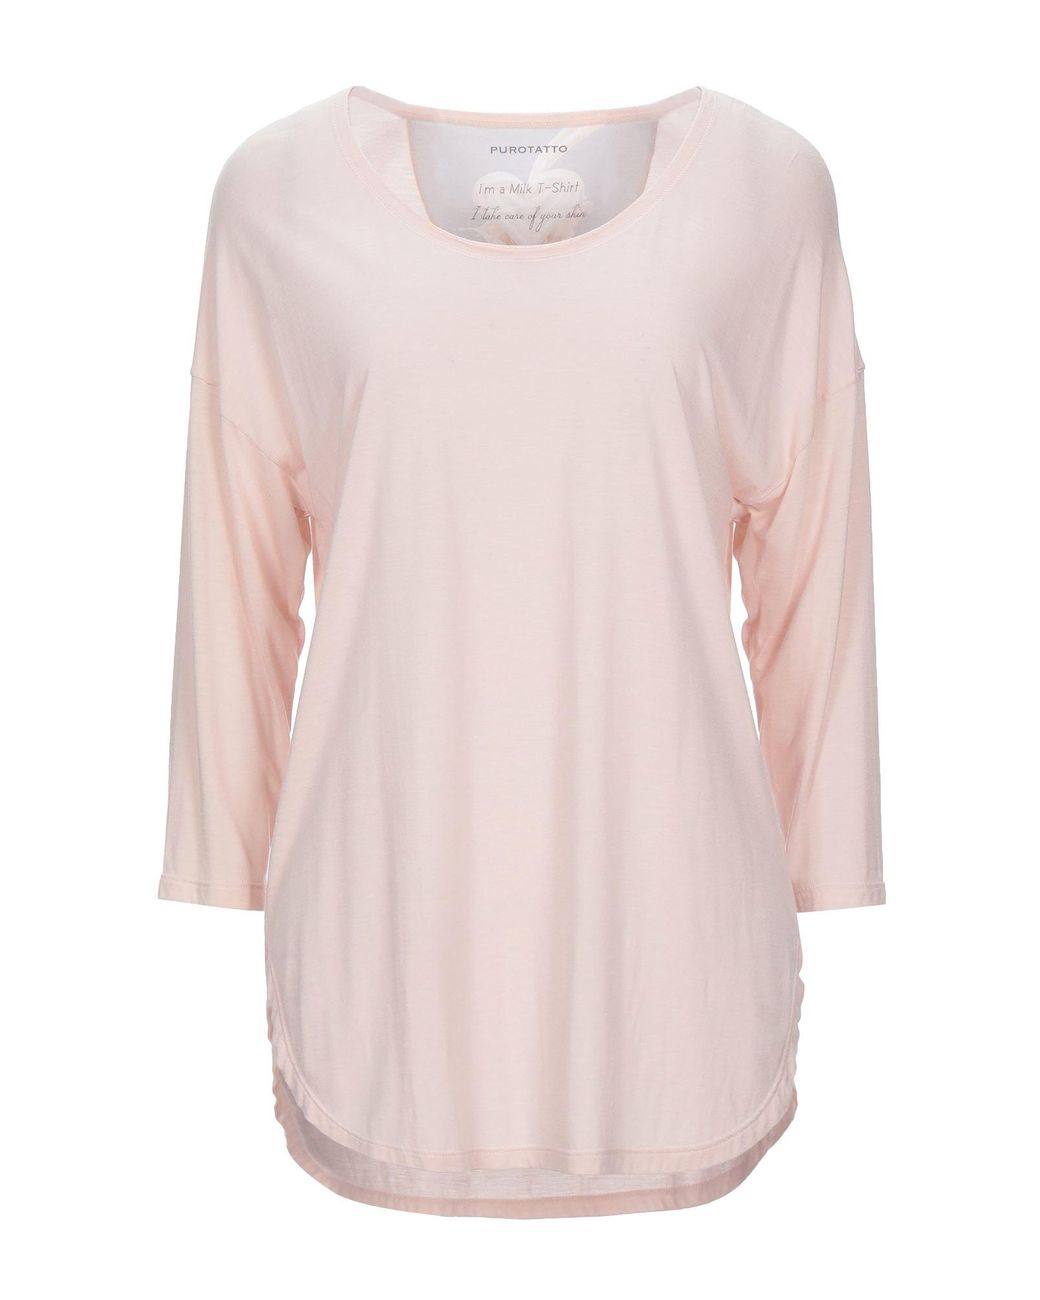 Purotatto T-shirt in Light Pink (Pink) - Lyst